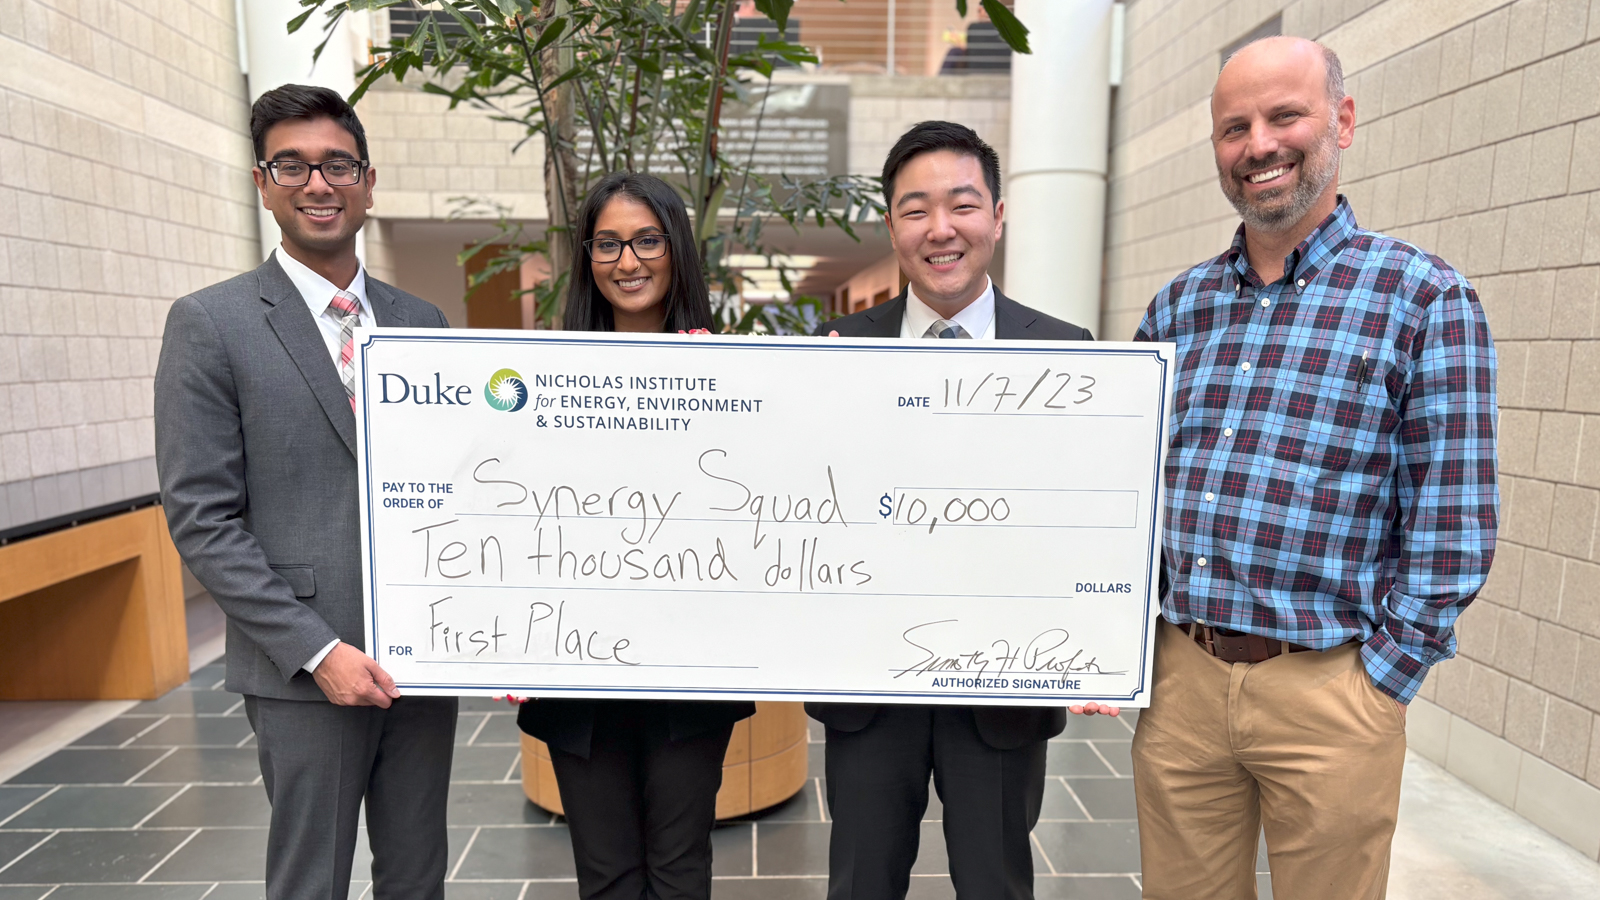 The winners of the 2023 Energy in Emerging Markets Case Competition holding a giant novelty check for $10,000."